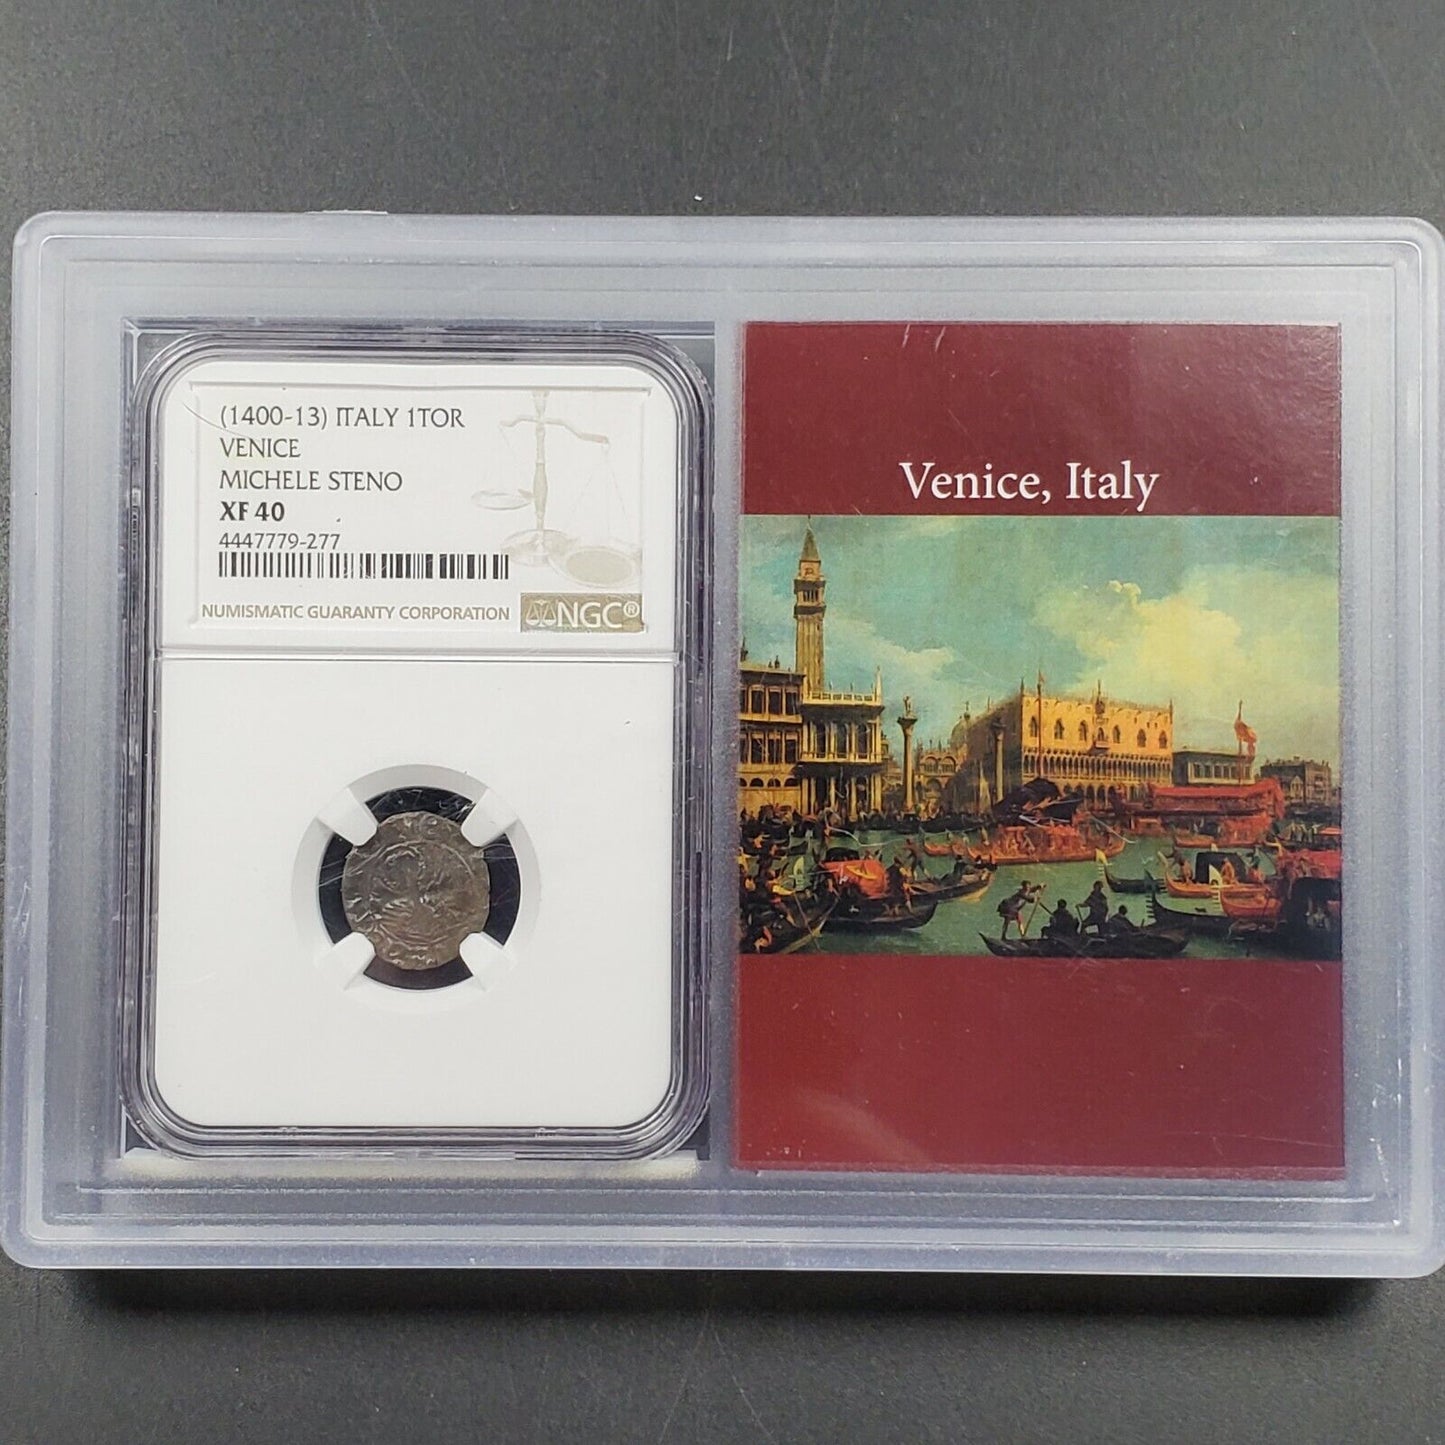 1400-1413 Italy 1TOR Venice Michelle Steno NGC XF40 Story Vault Medieval Coin